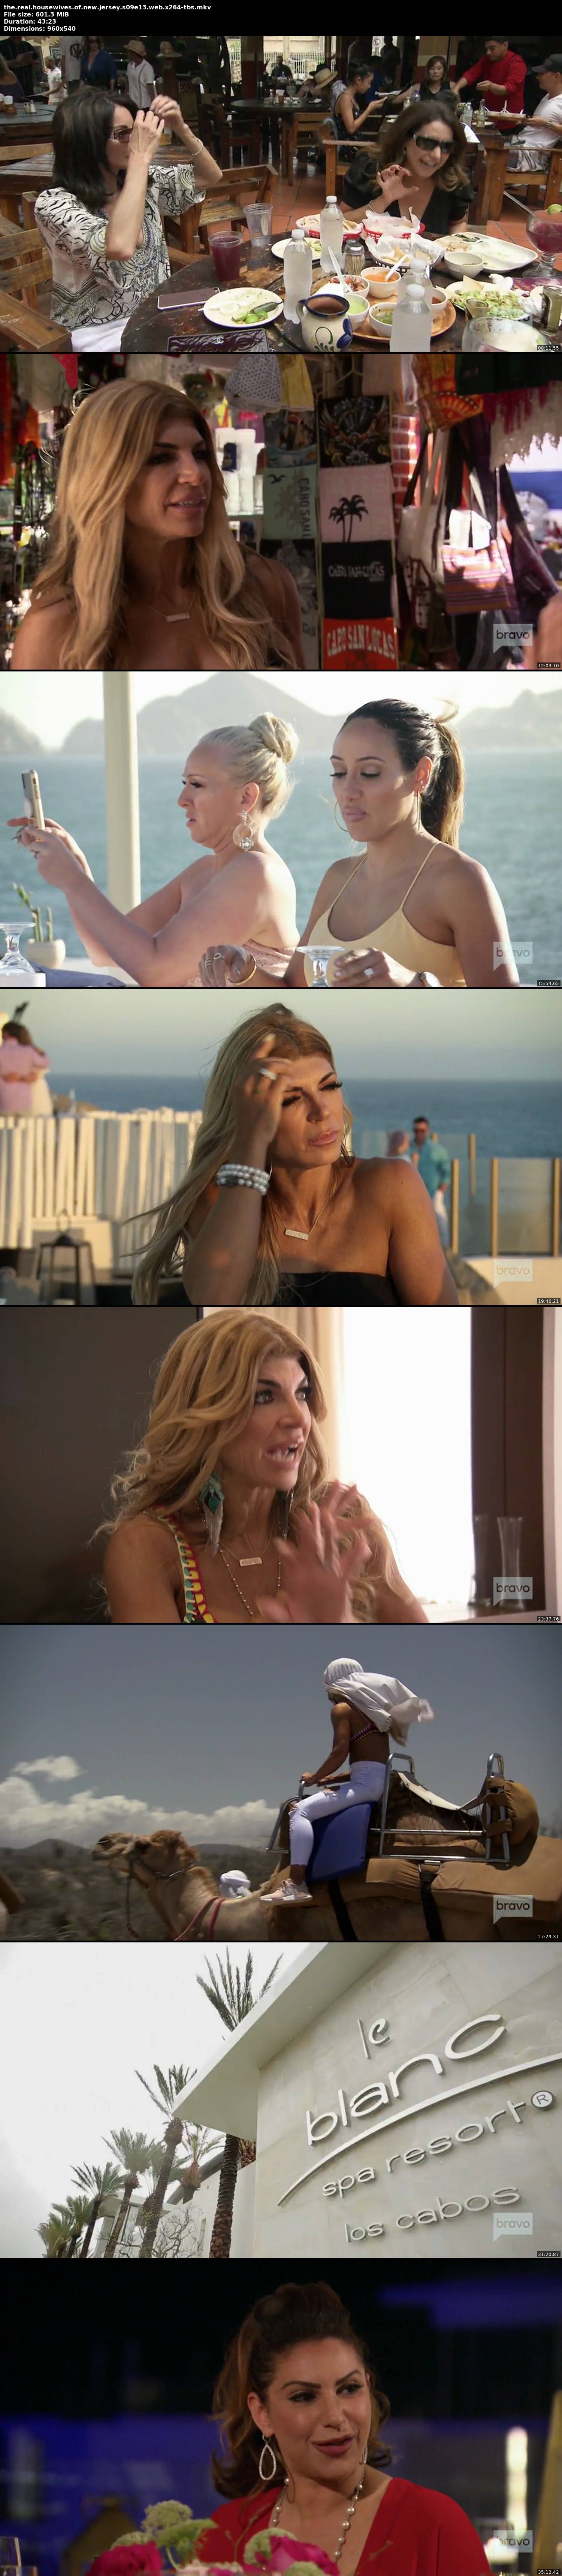 the real housewives of new jersey s09e13